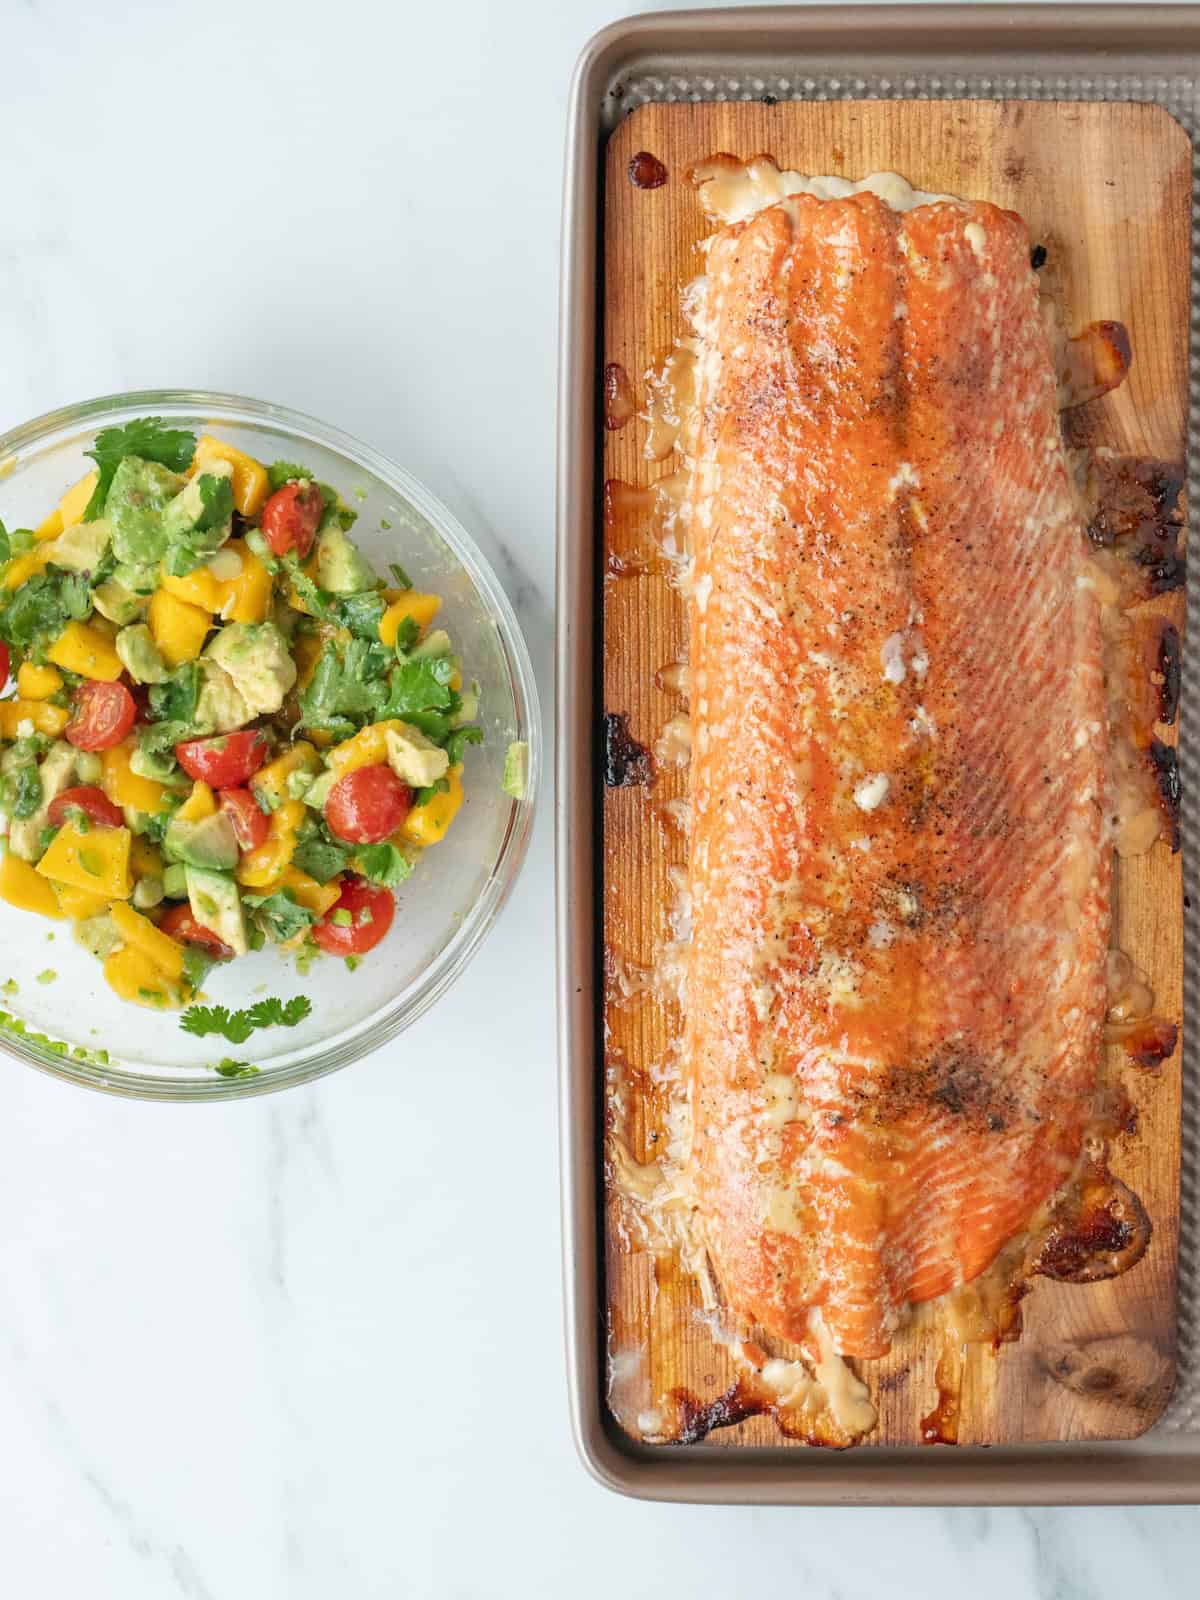 A baking sheet with a cedar plank on it that has a salmon filet with some char from the grilling, along with a glass bowl with mango tomato avocado salsa.